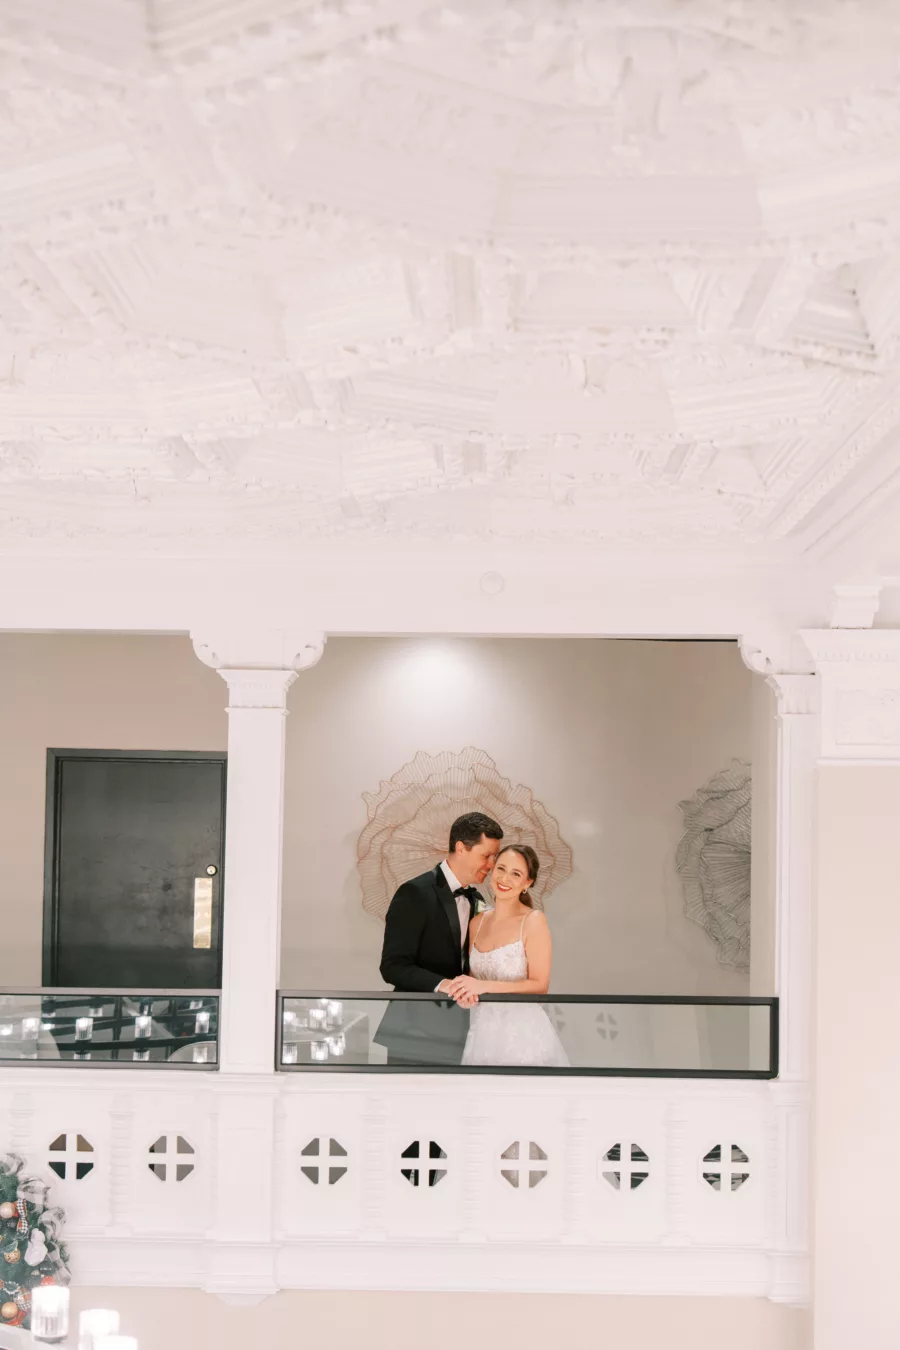 Intimate Bride and Groom Balcony Wedding Portrait | Tampa Bay Photographer Eddy Almaguer Photography | Event Venue Hotel Flor